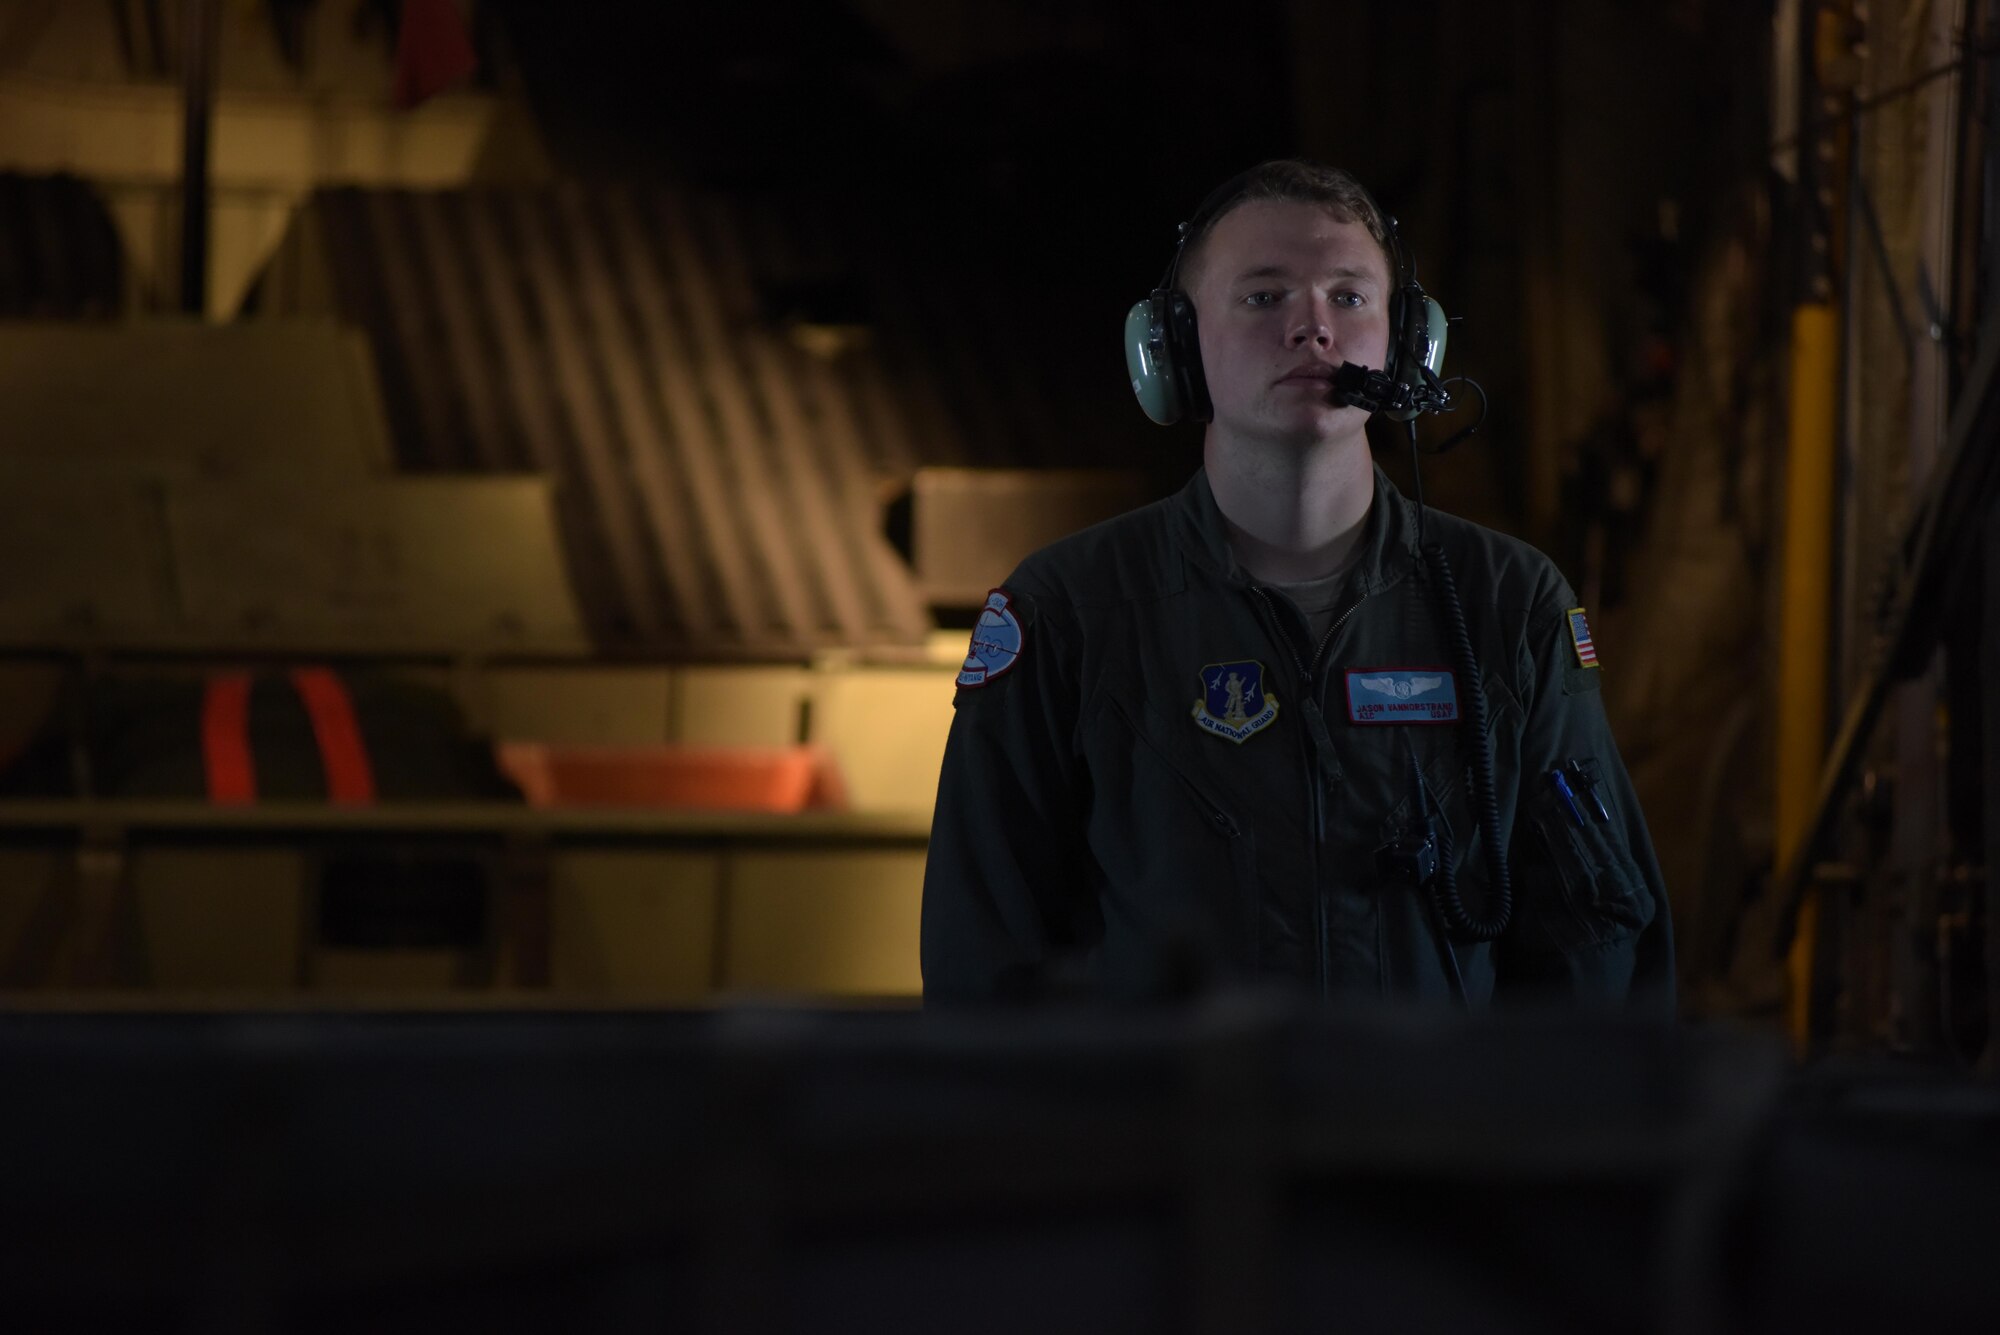 Airman 1st Class Jason Vannostrand, a student loadmaster with the 139th Airlift Squadron, on a training flight to Raven Camp, Greenland, from Kangerlussuaq, Greenland, on July 28, 2017. Raven Camp is used to train aircrews on LC-130 operations on a skiway. (U.S. Air National Guard photo by Senior Airman Jamie Spaulding/Released)